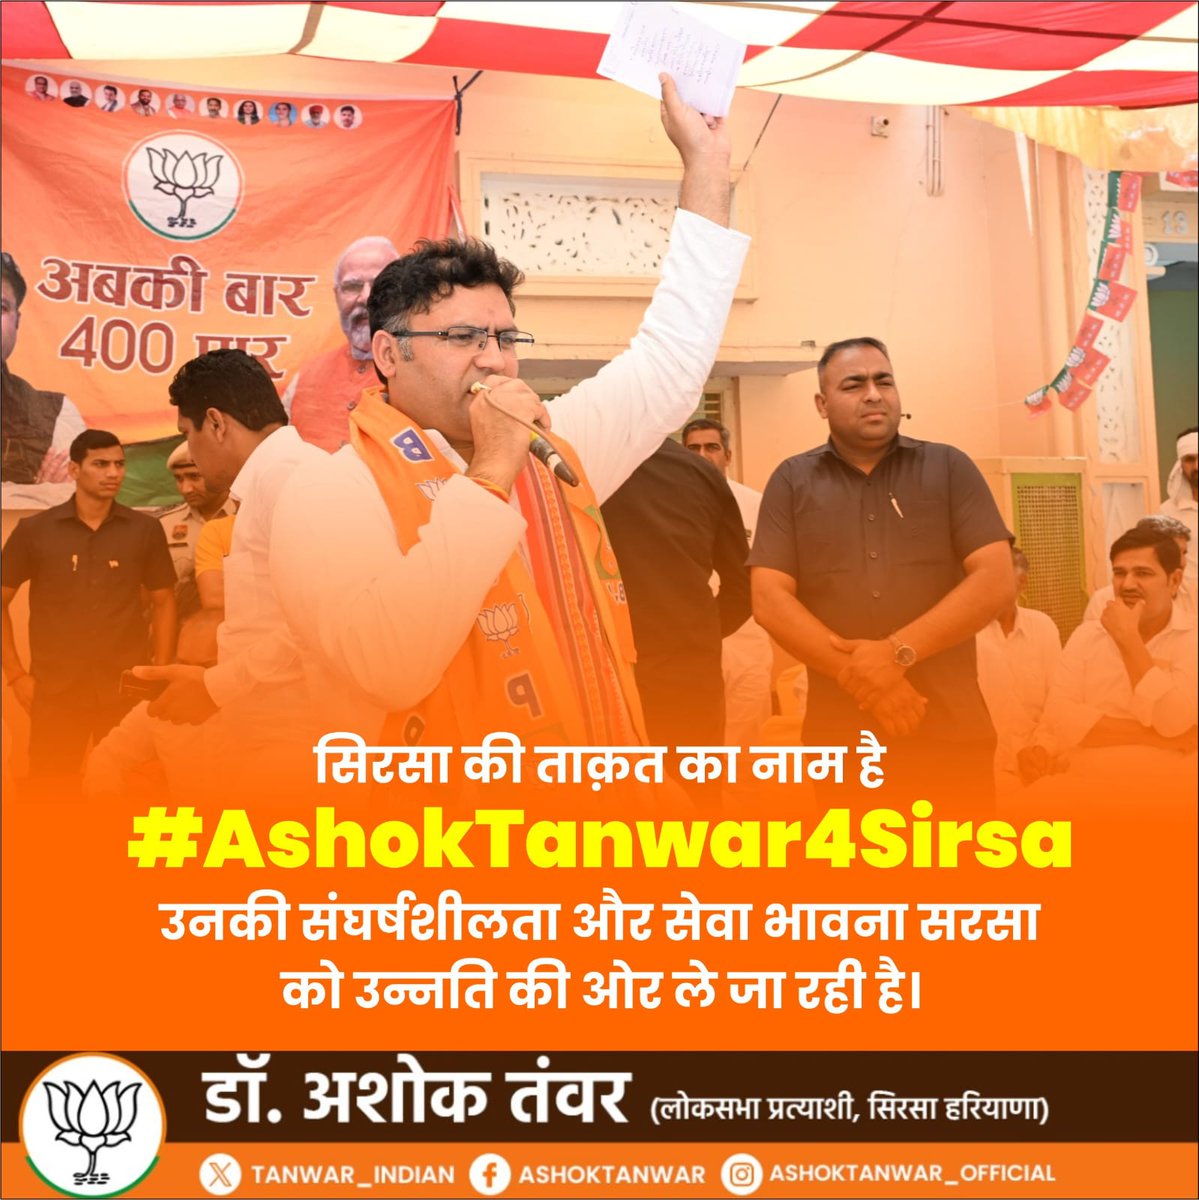 He is the best capable candidate for this election campaign for bjp party to participate in the election to show the power. #AshokTanwar4Sirsa